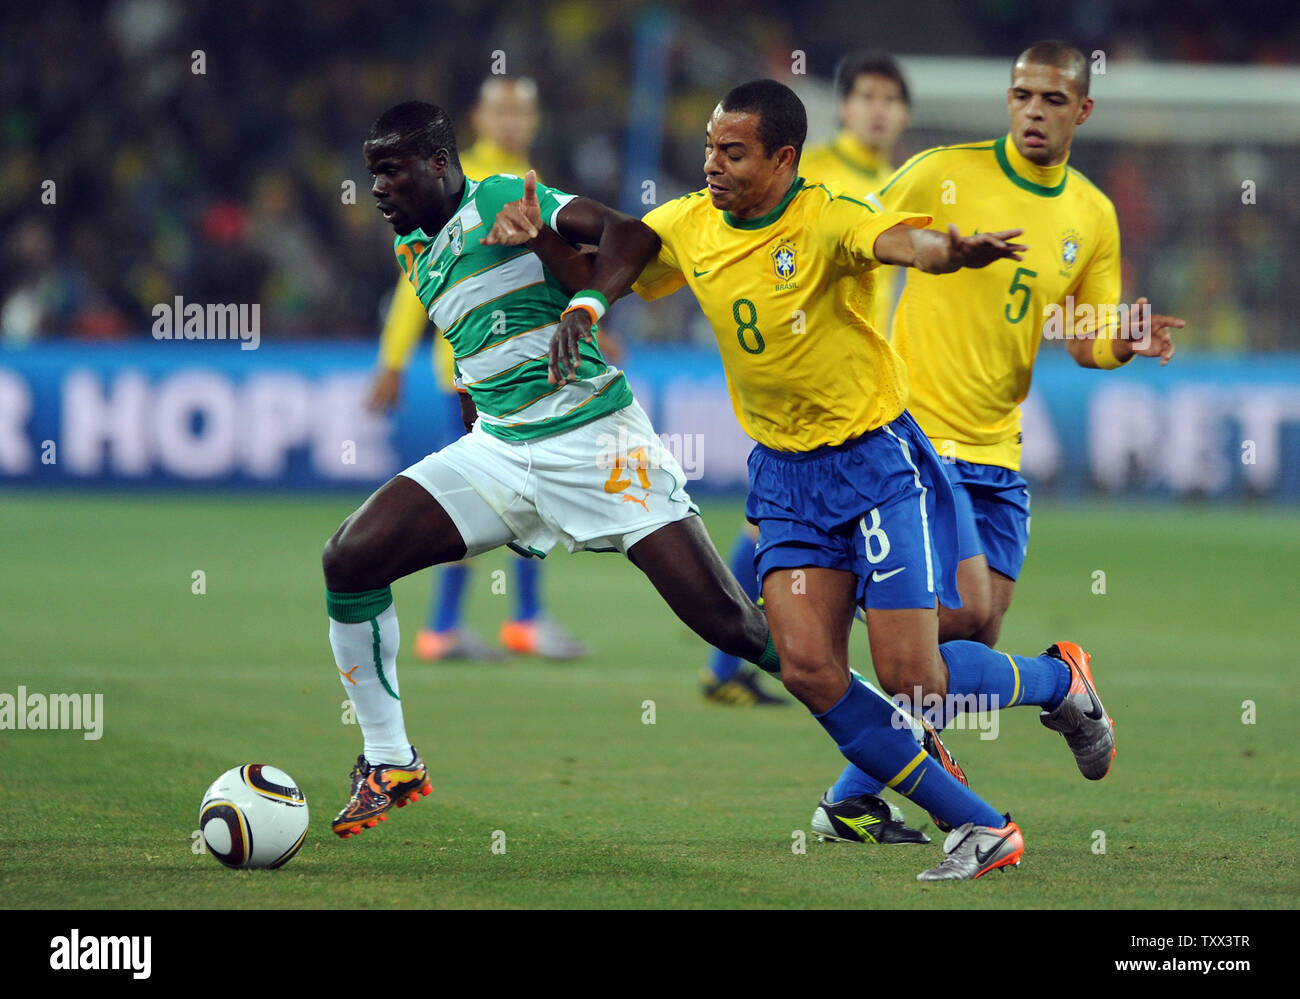 Gilberto Silva of Brazil and Emmanuel Eboue of Ivory Coast go after the ball during the Group G match at Soccer City Stadium in Johannesburg, South Africa on June 20, 2010. UPI/Chris Brunskill Stock Photo